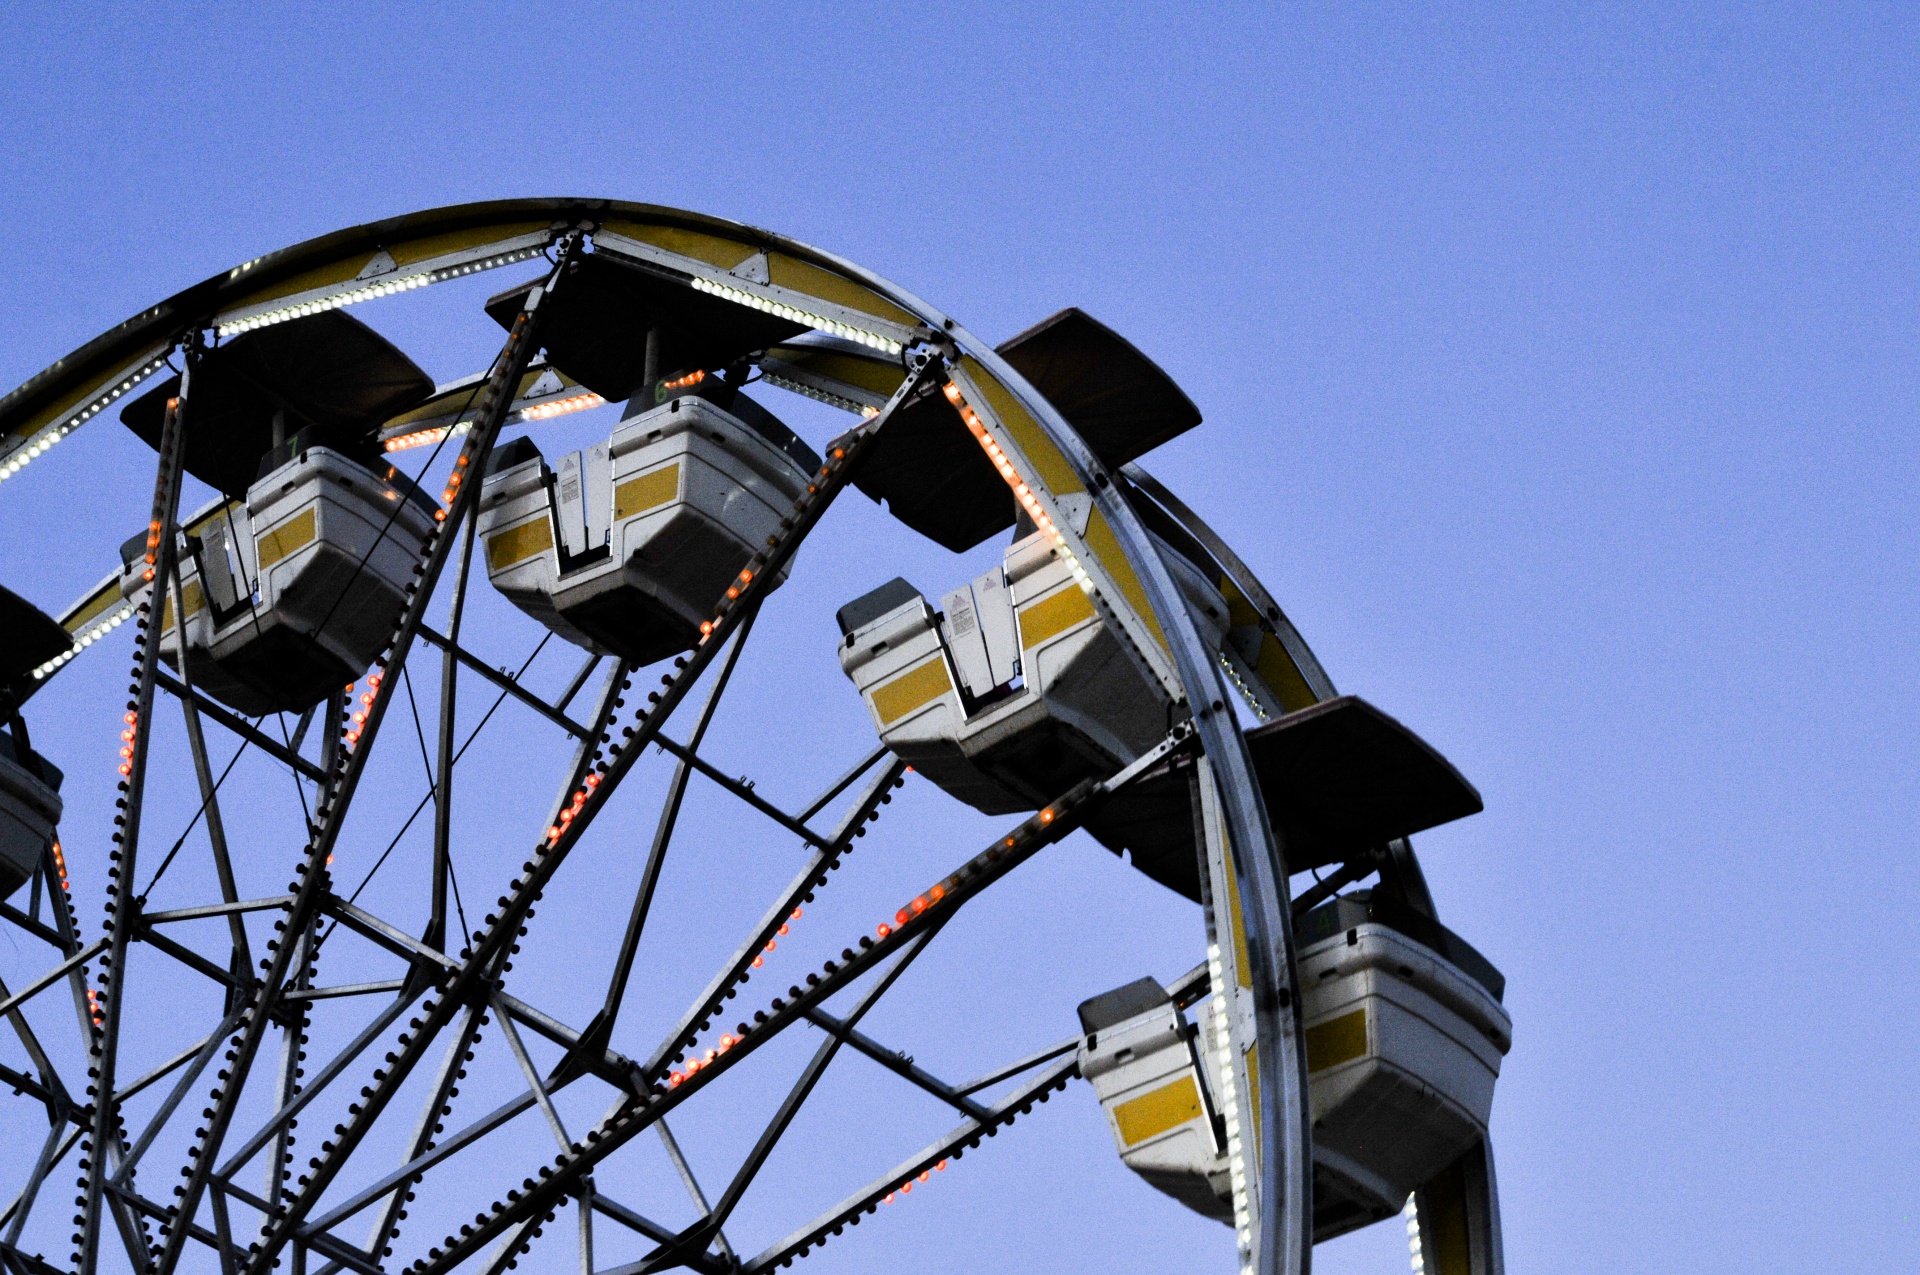 Partial view of the cars on a Ferris wheel